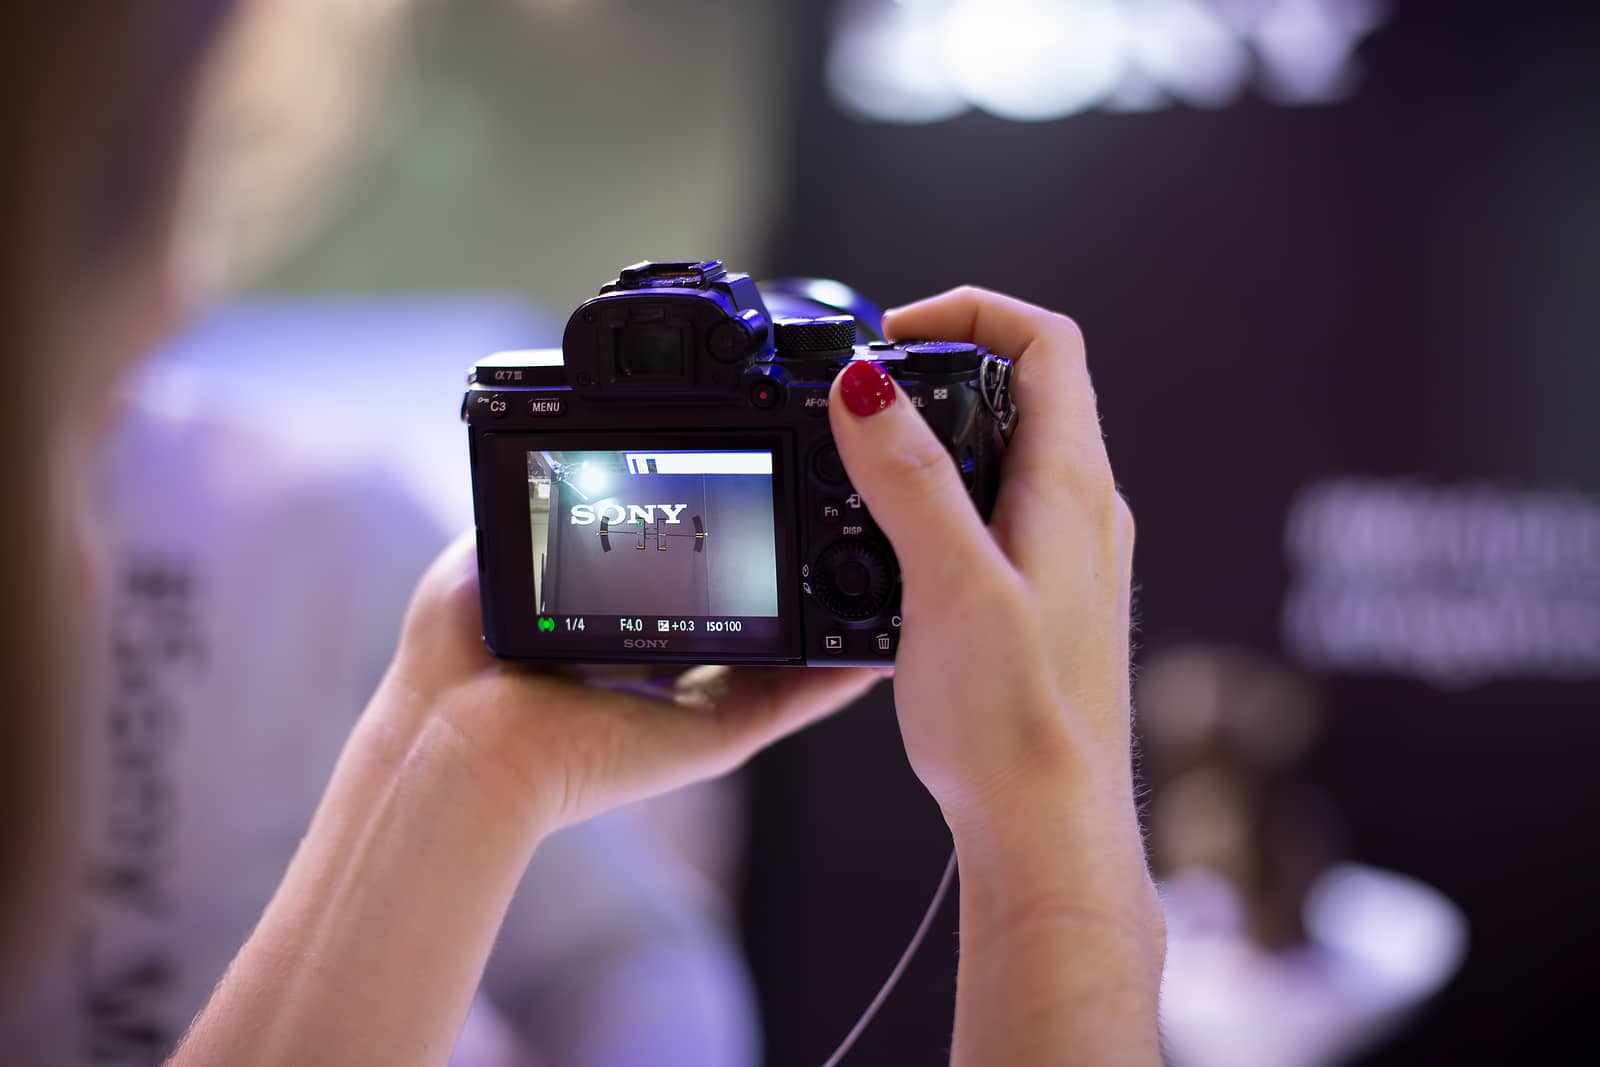  sony alpha a7 iii 3 in womans hands pointing 